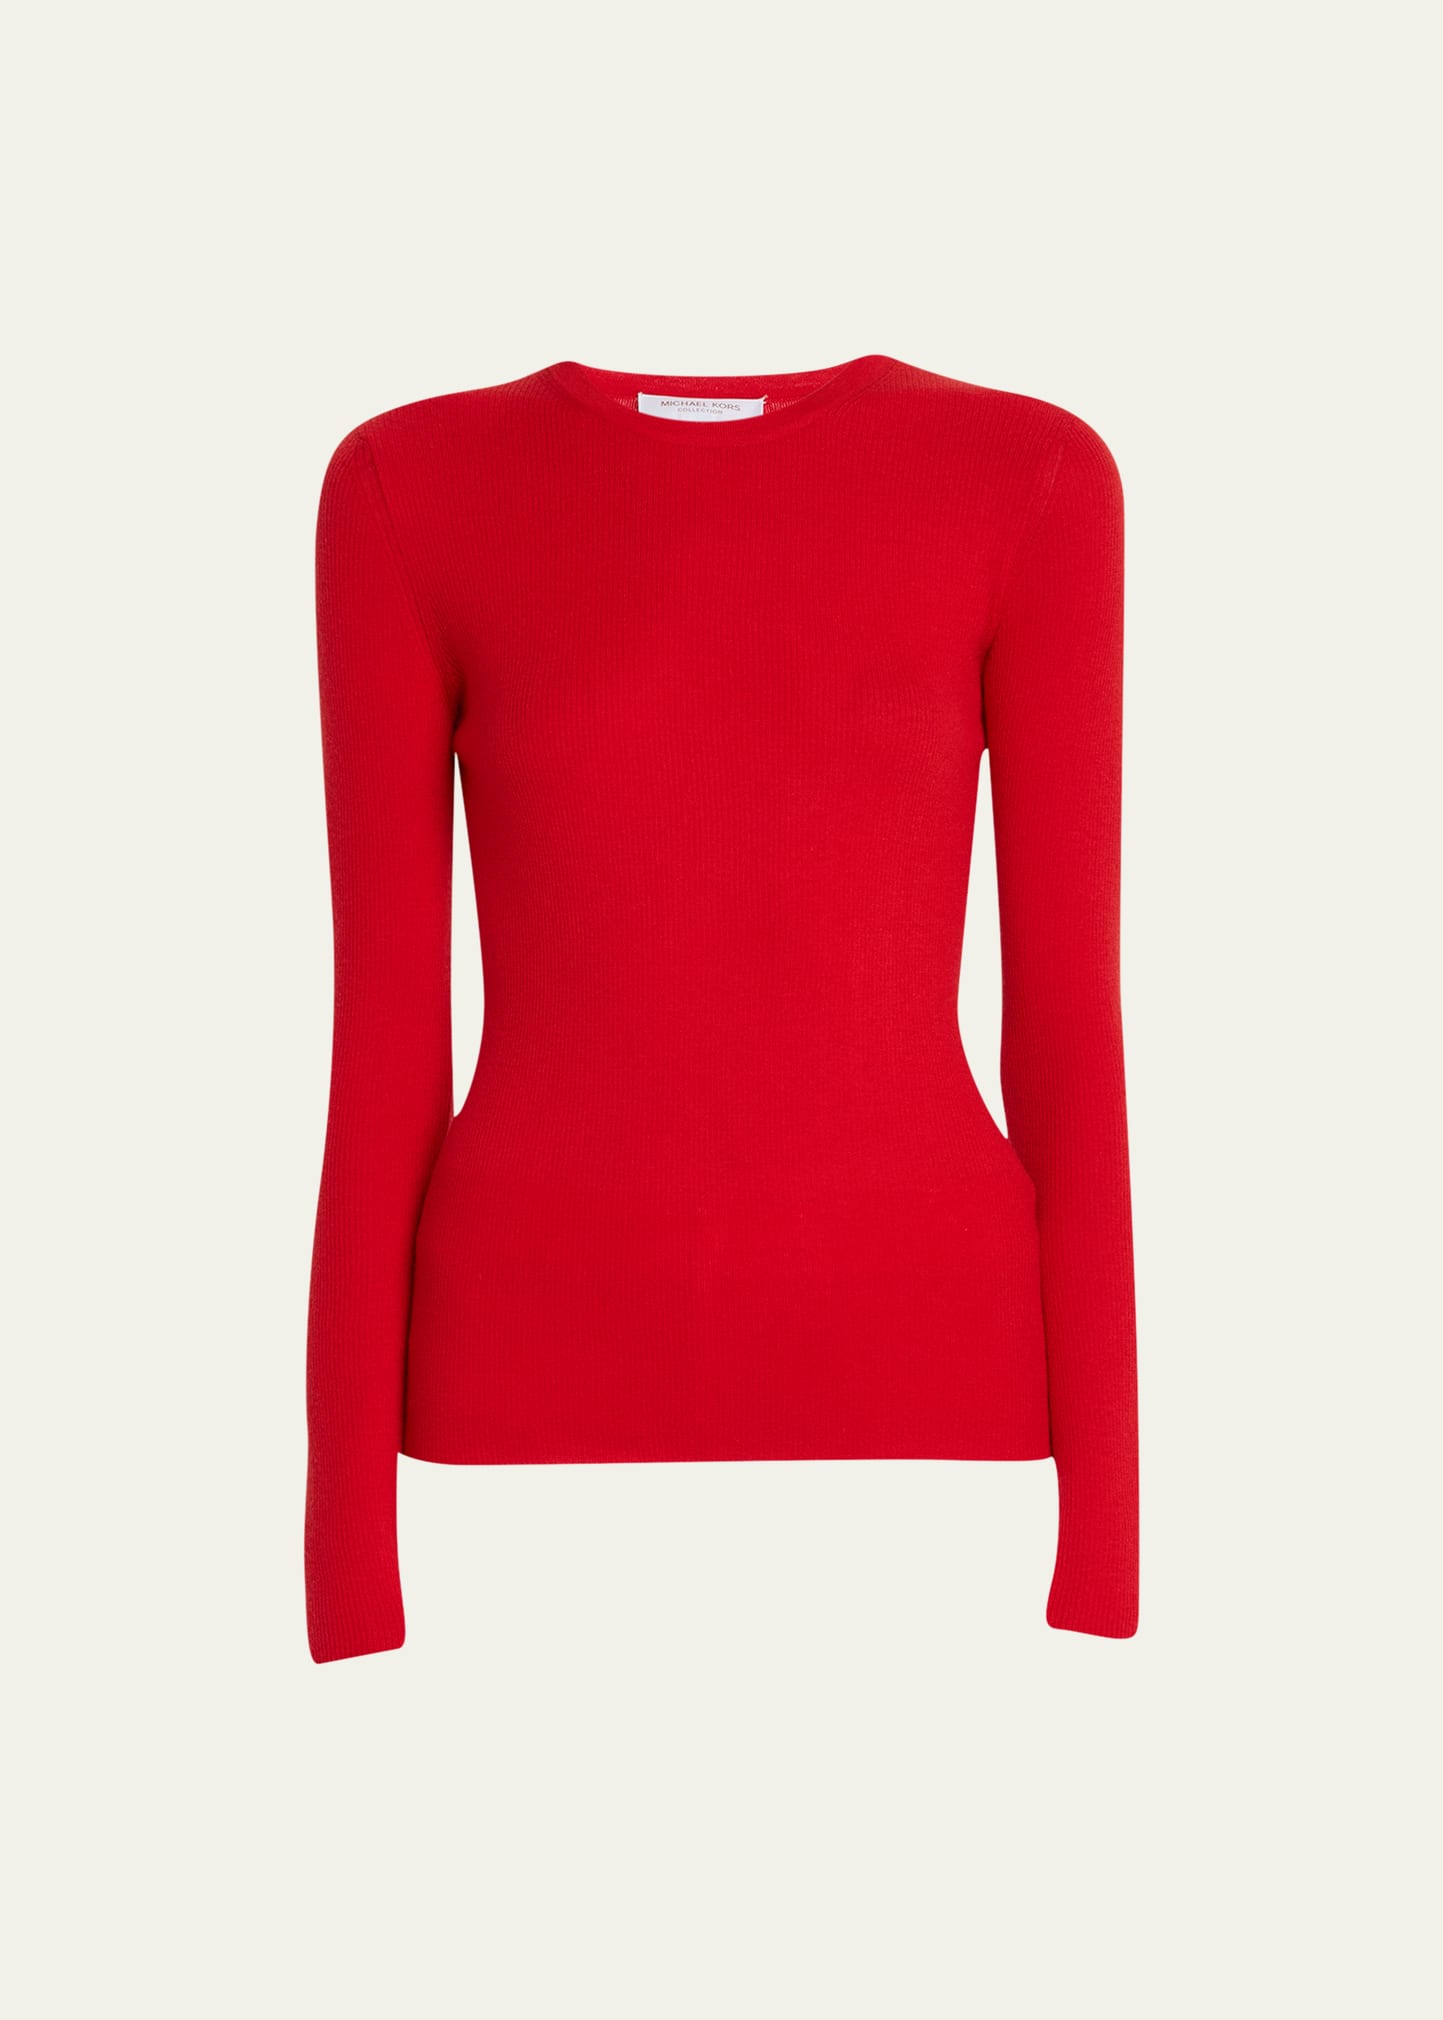 Michael Kors Cashmere Hutton Rib Top In Red